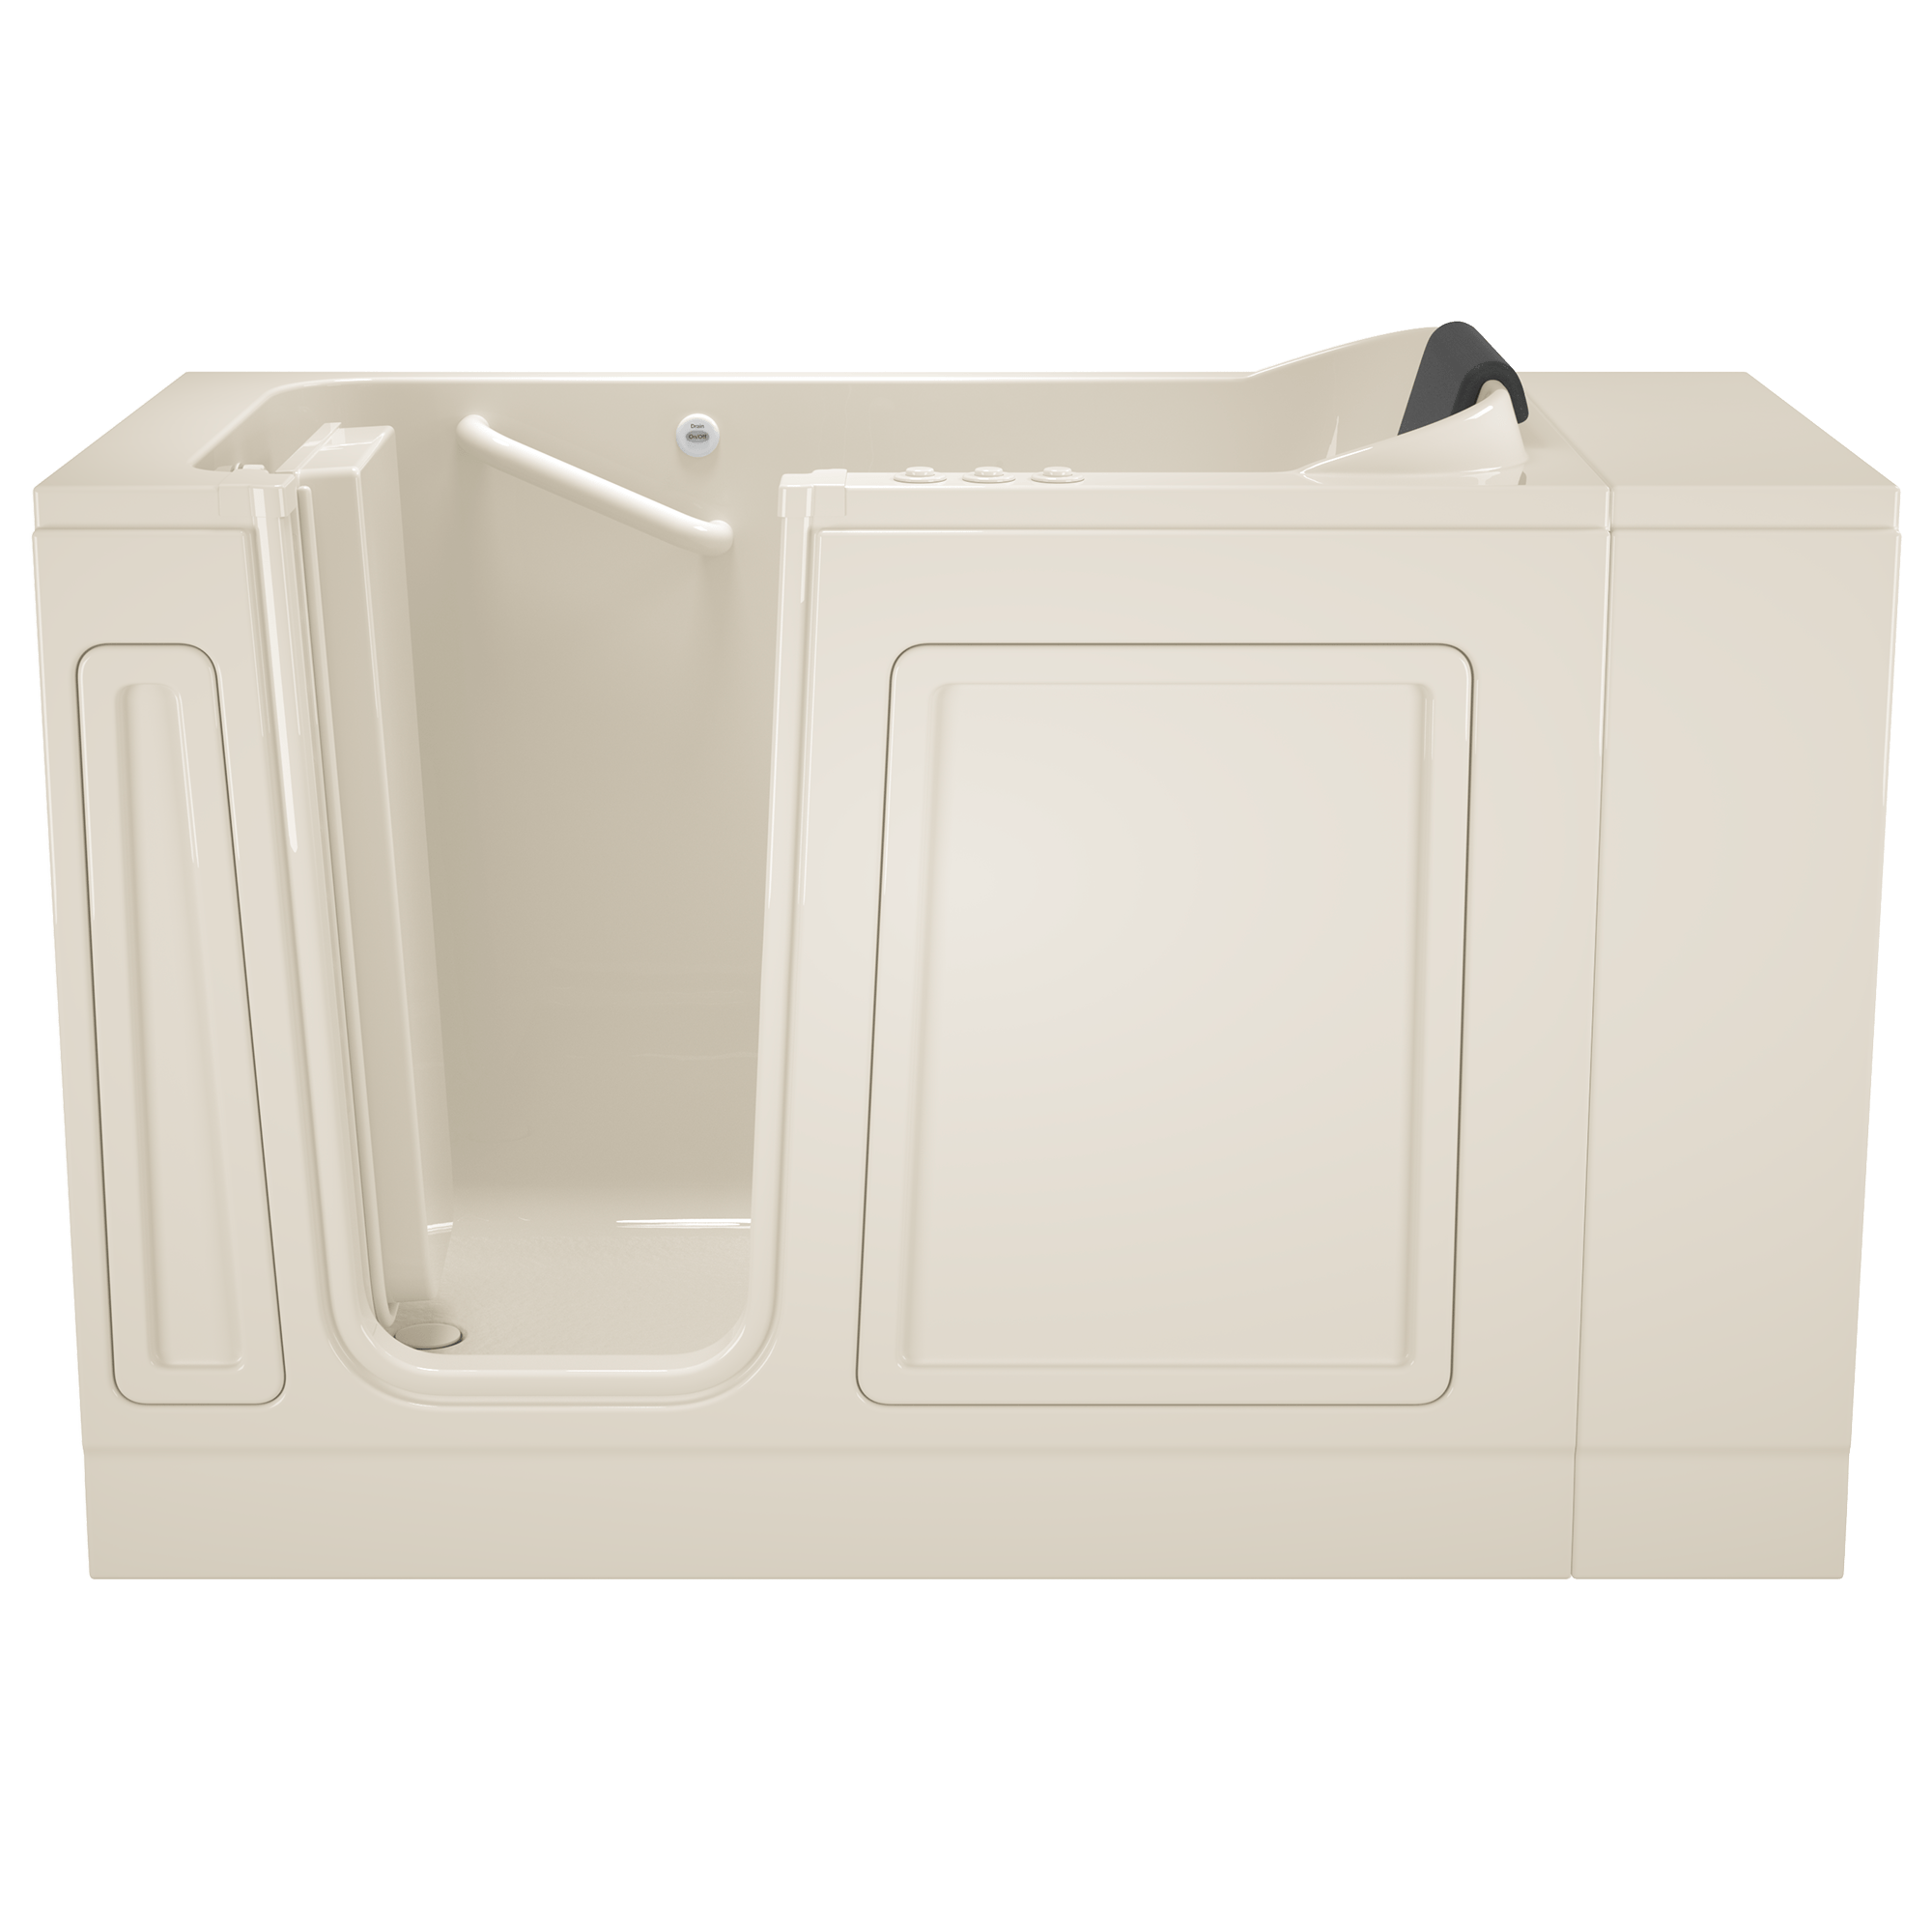 Acrylic Luxury Series 28 x 48-Inch Walk-in Tub With Combination Air Spa and Whirlpool Systems - Left-Hand Drain